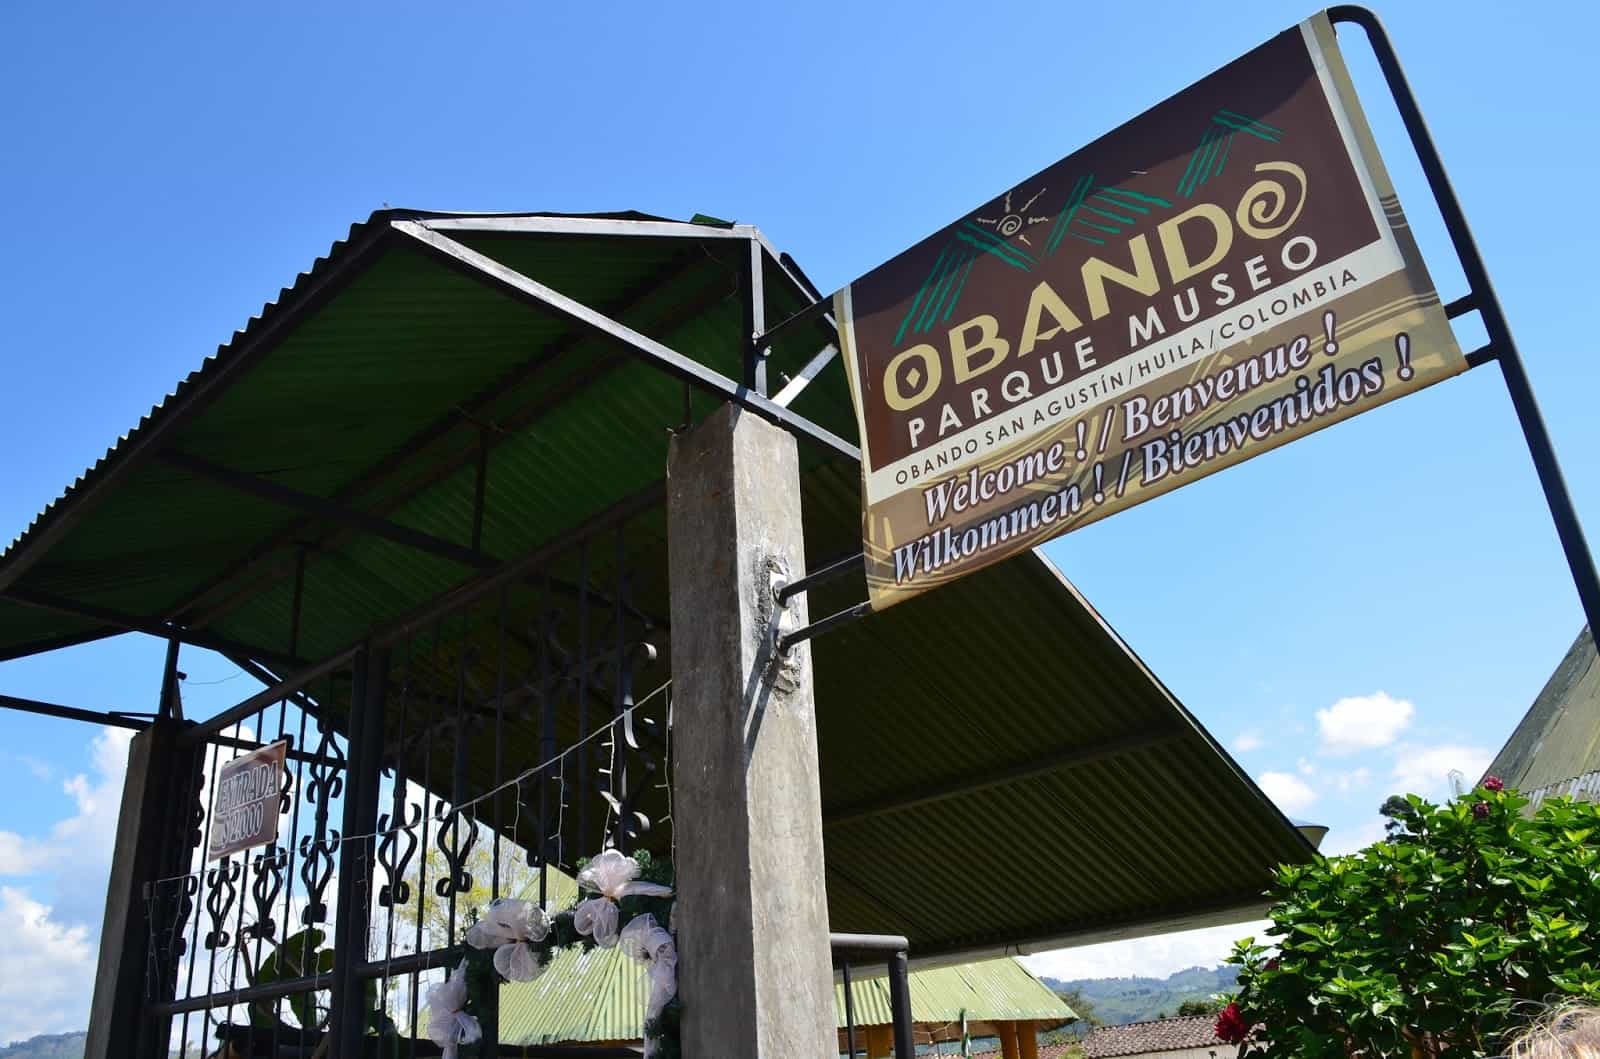 Entrance to the Obando Museum